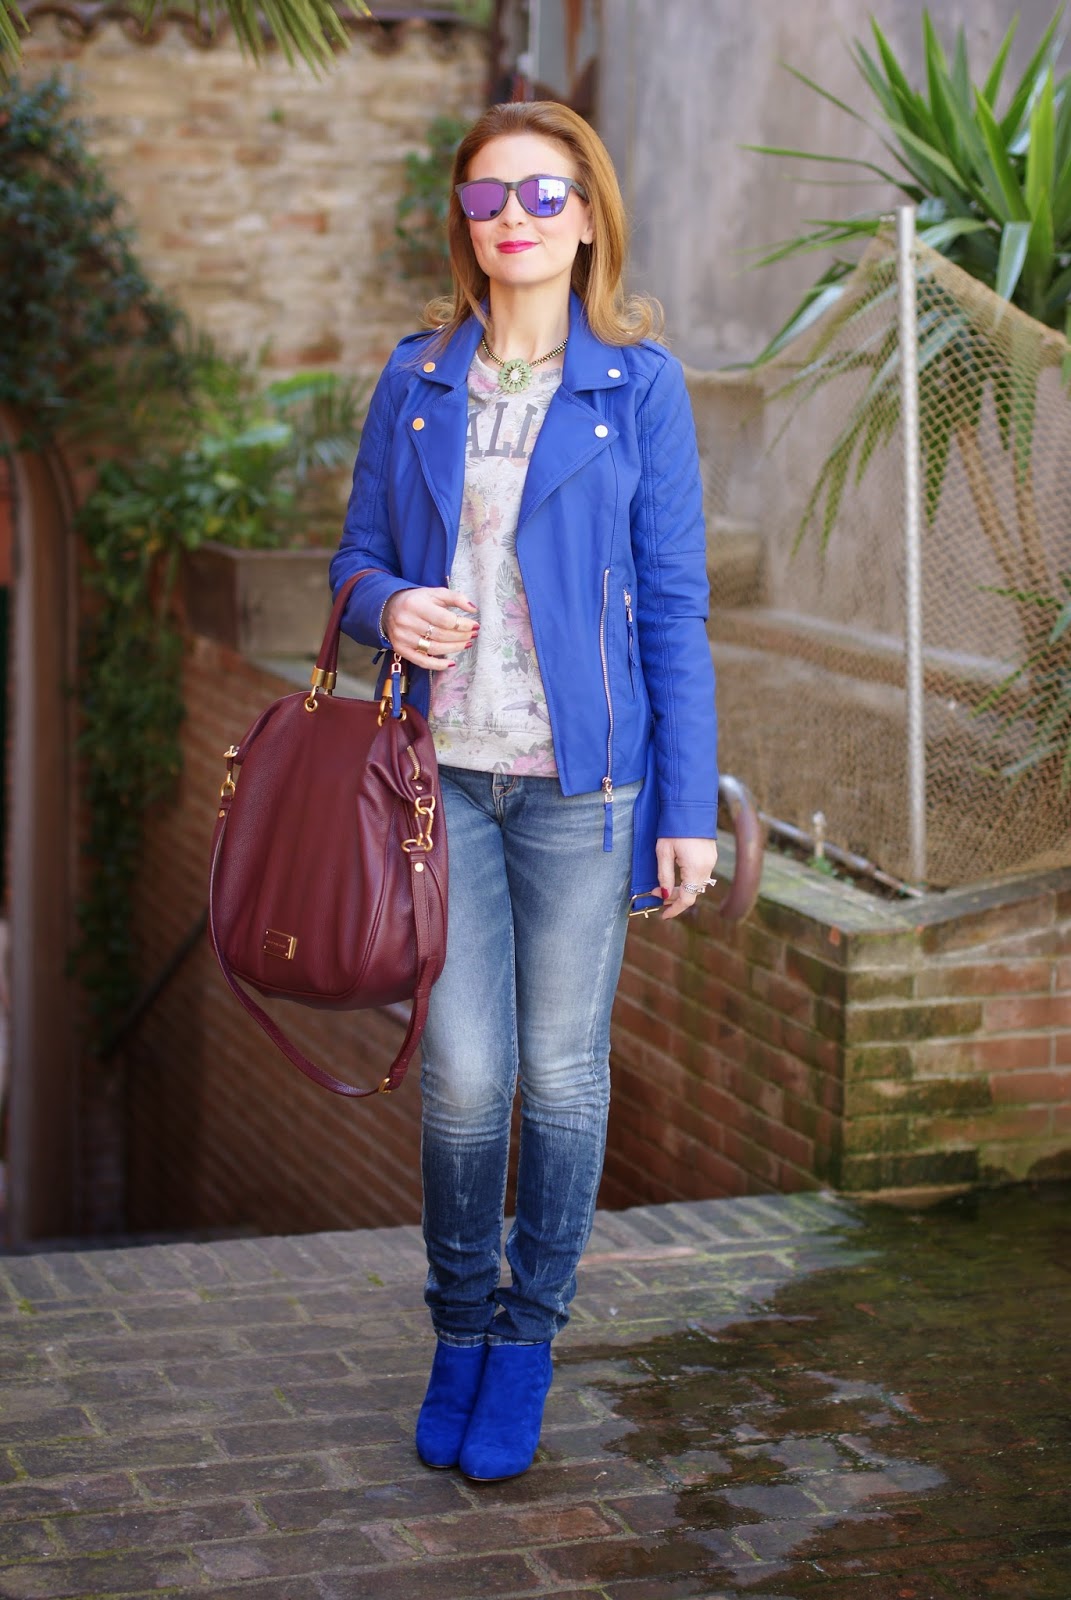 Cobalt blue biker jacket and ankle boots | Fashion and Cookies ...